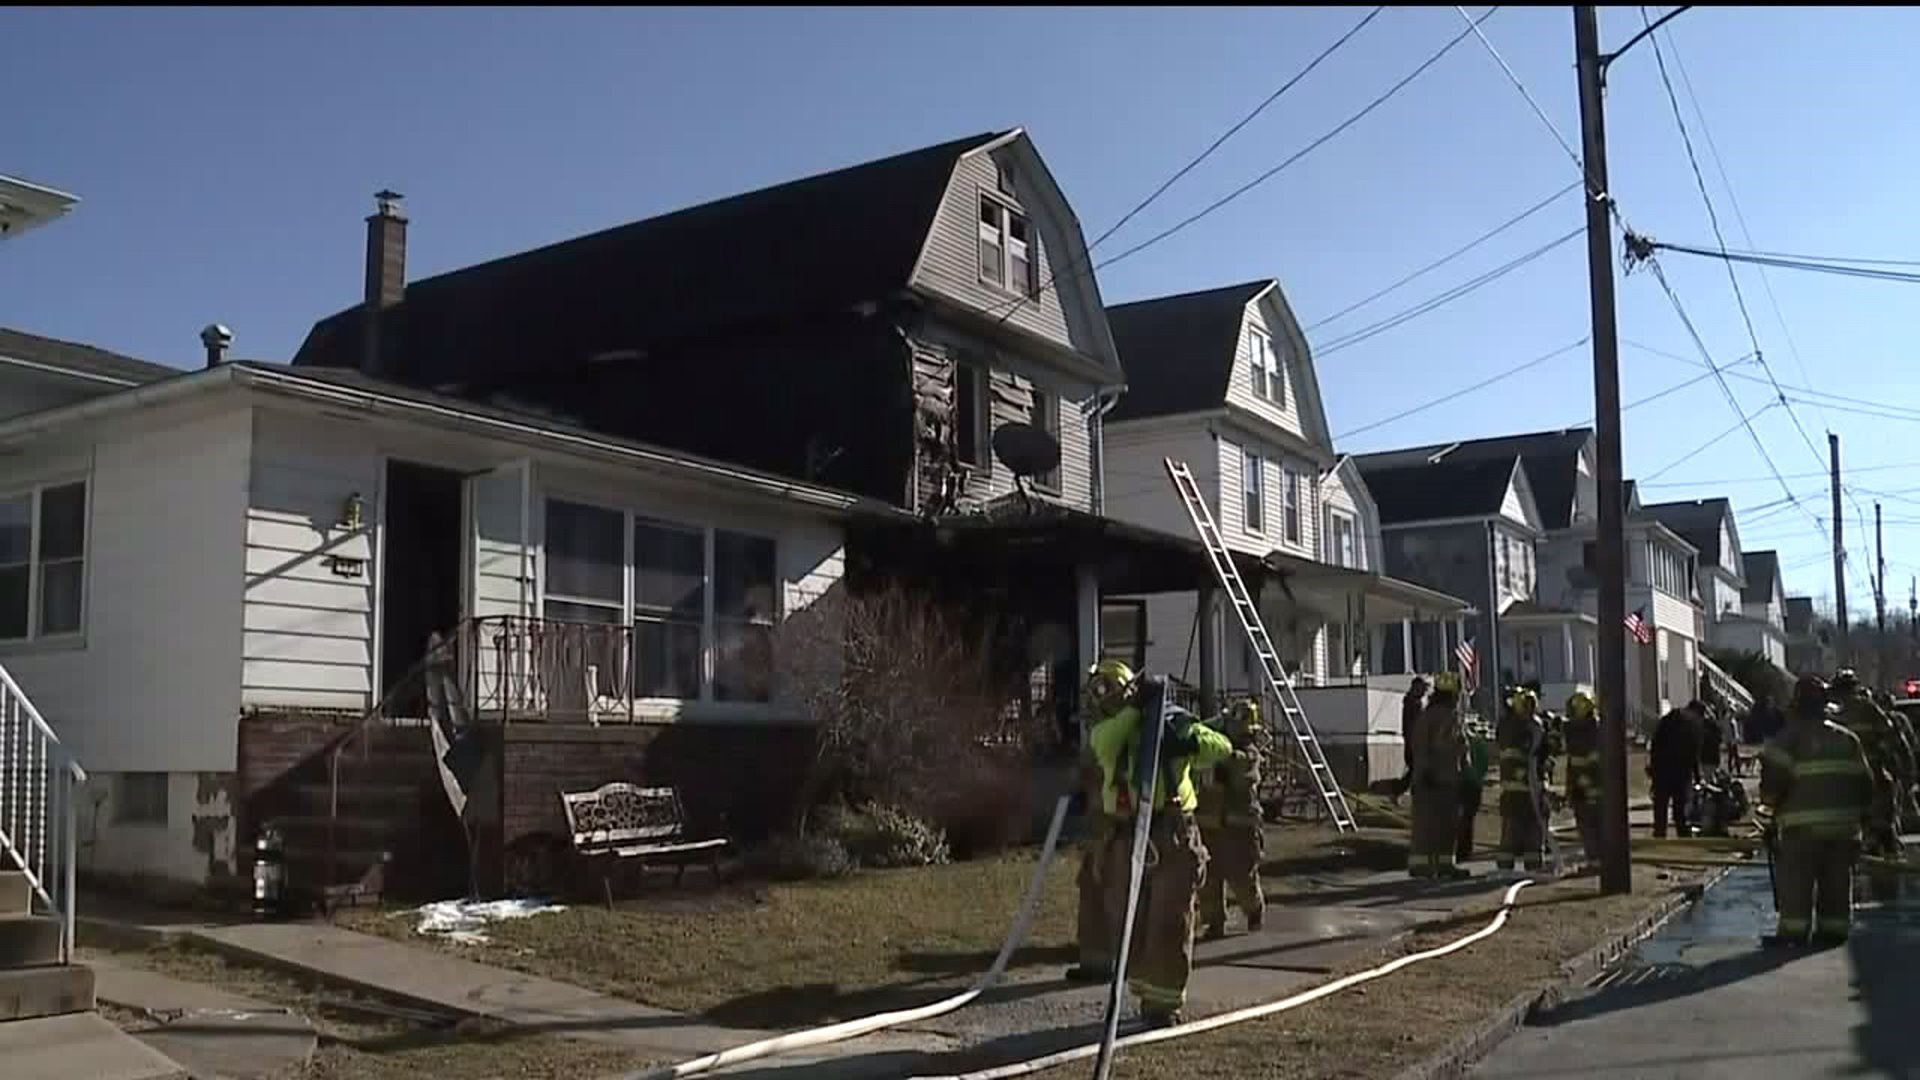 Home in Luzerne County Damaged by Flames